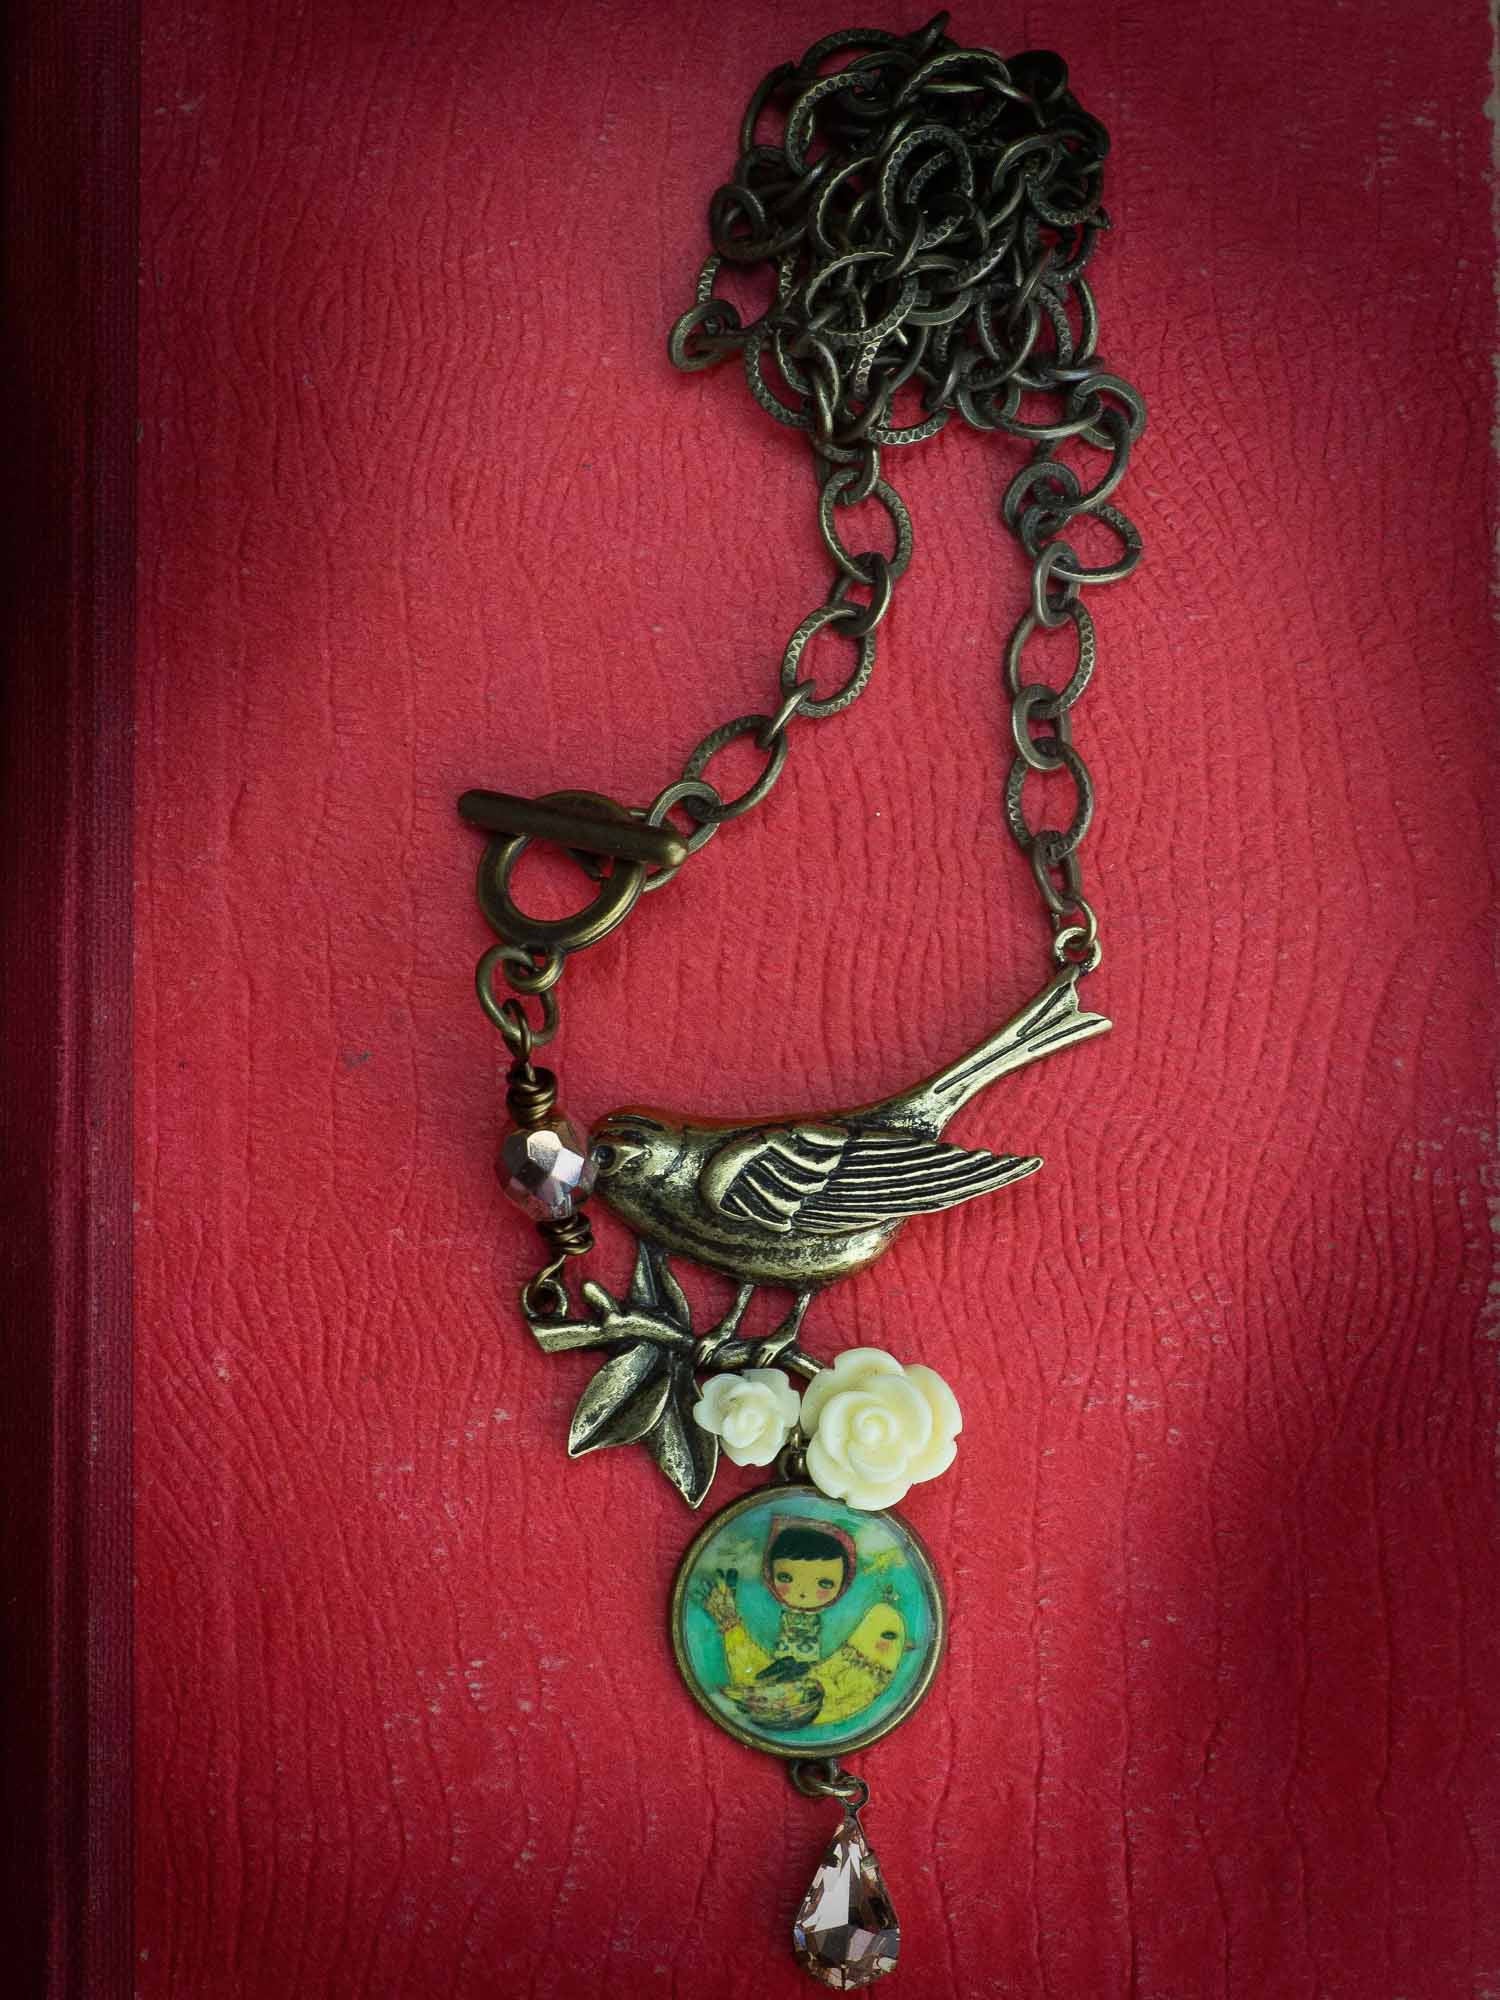 Danita original jewelry necklace wearable art with a metal bird charm and yellow roses